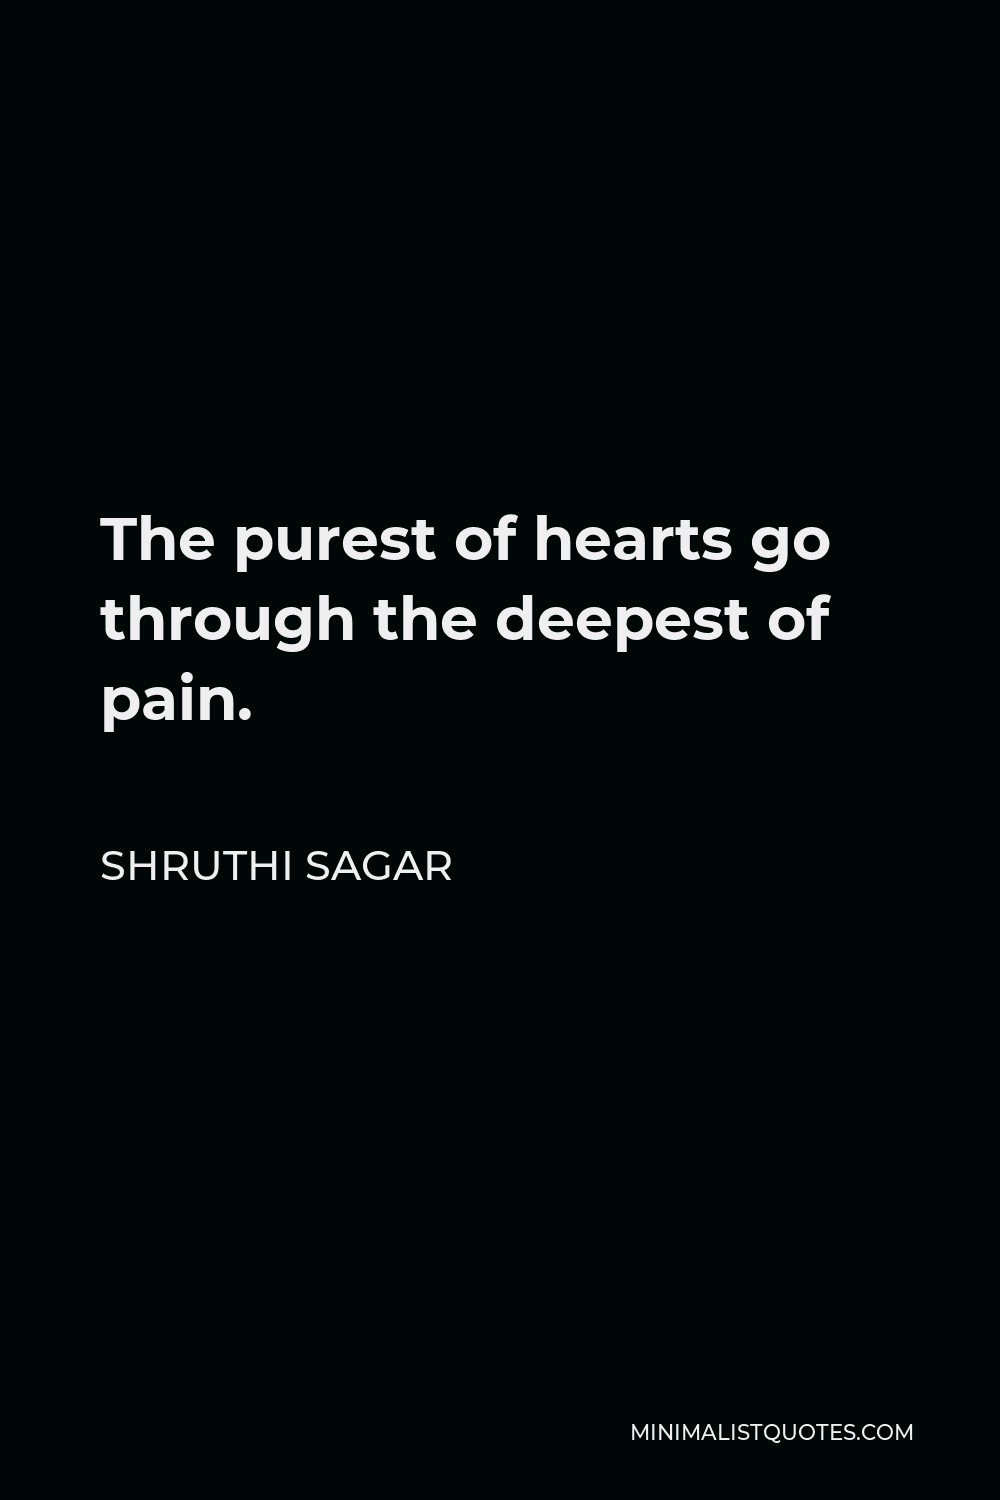 Shruthi Sagar Quote - The purest of hearts go through the deepest of pain.